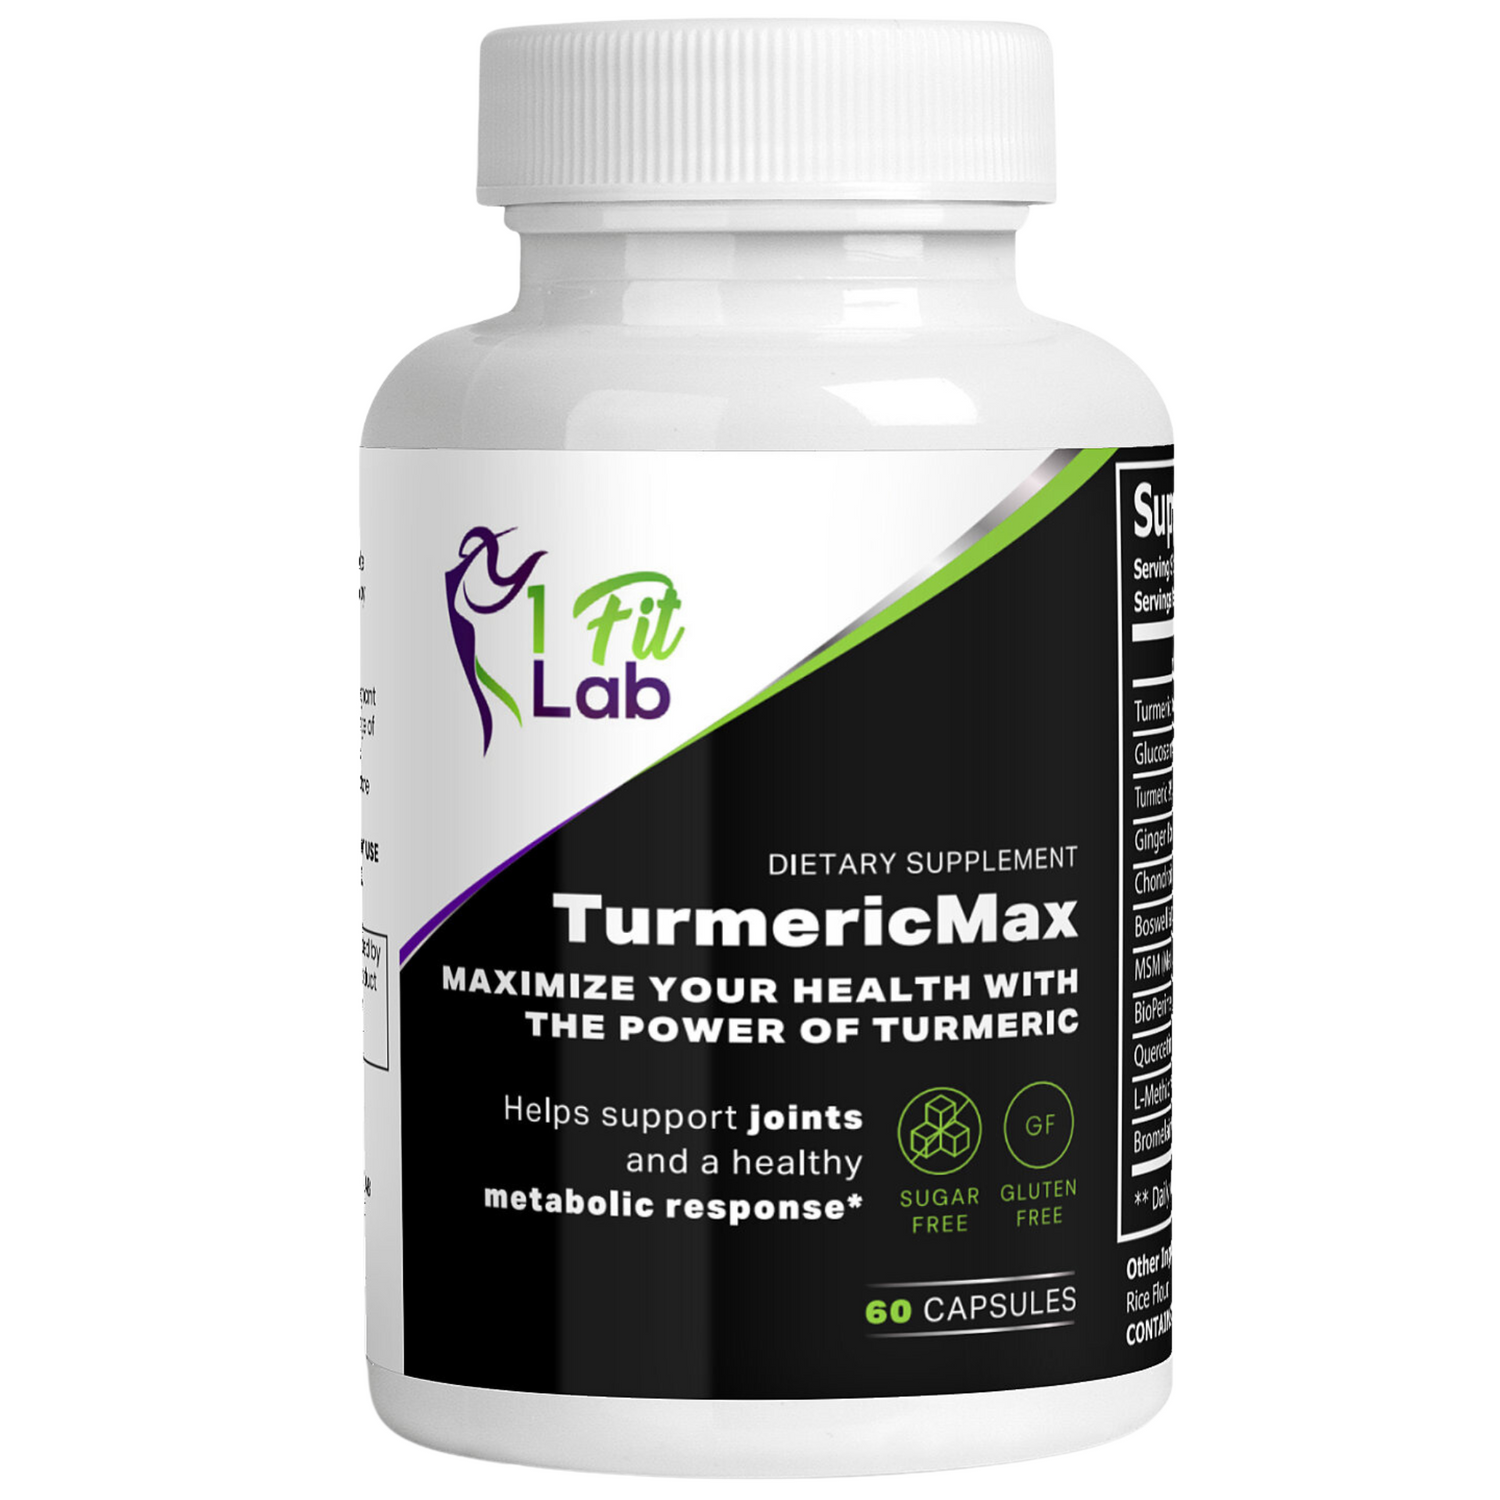 Bottle of TurmericMax Maximum-Strength Turmeric for inflammation and joint support